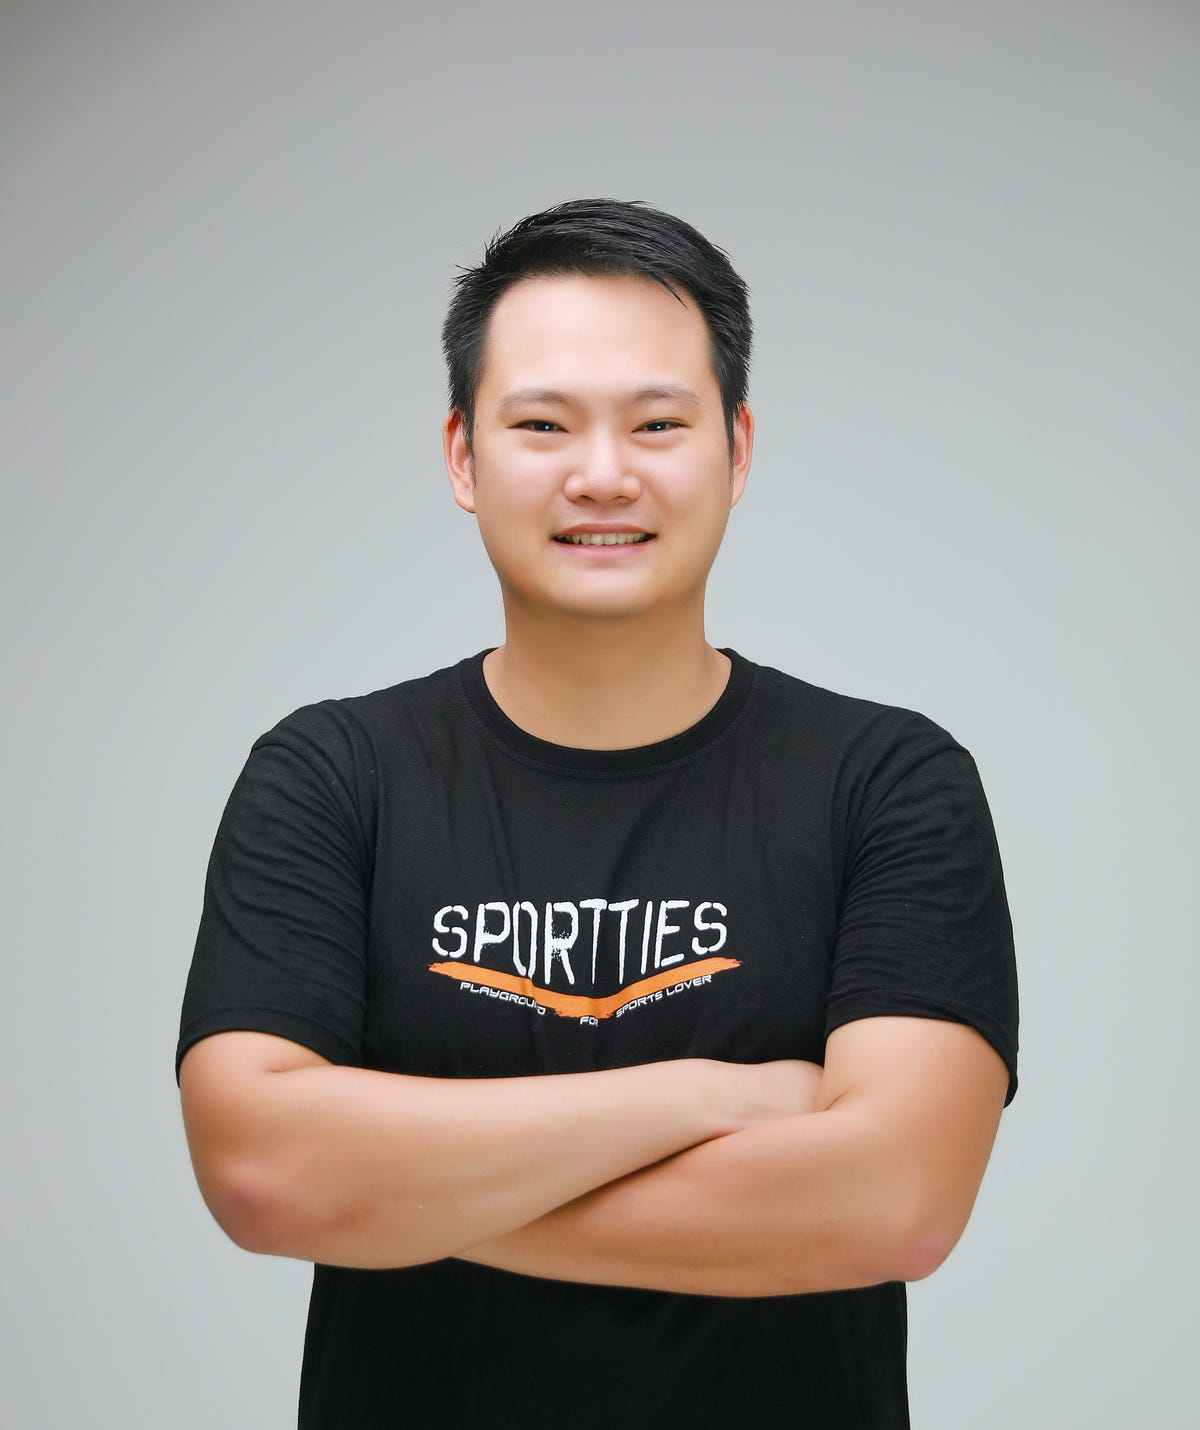 E-resident Gi H. Nam from South Korea and founder of Sportties